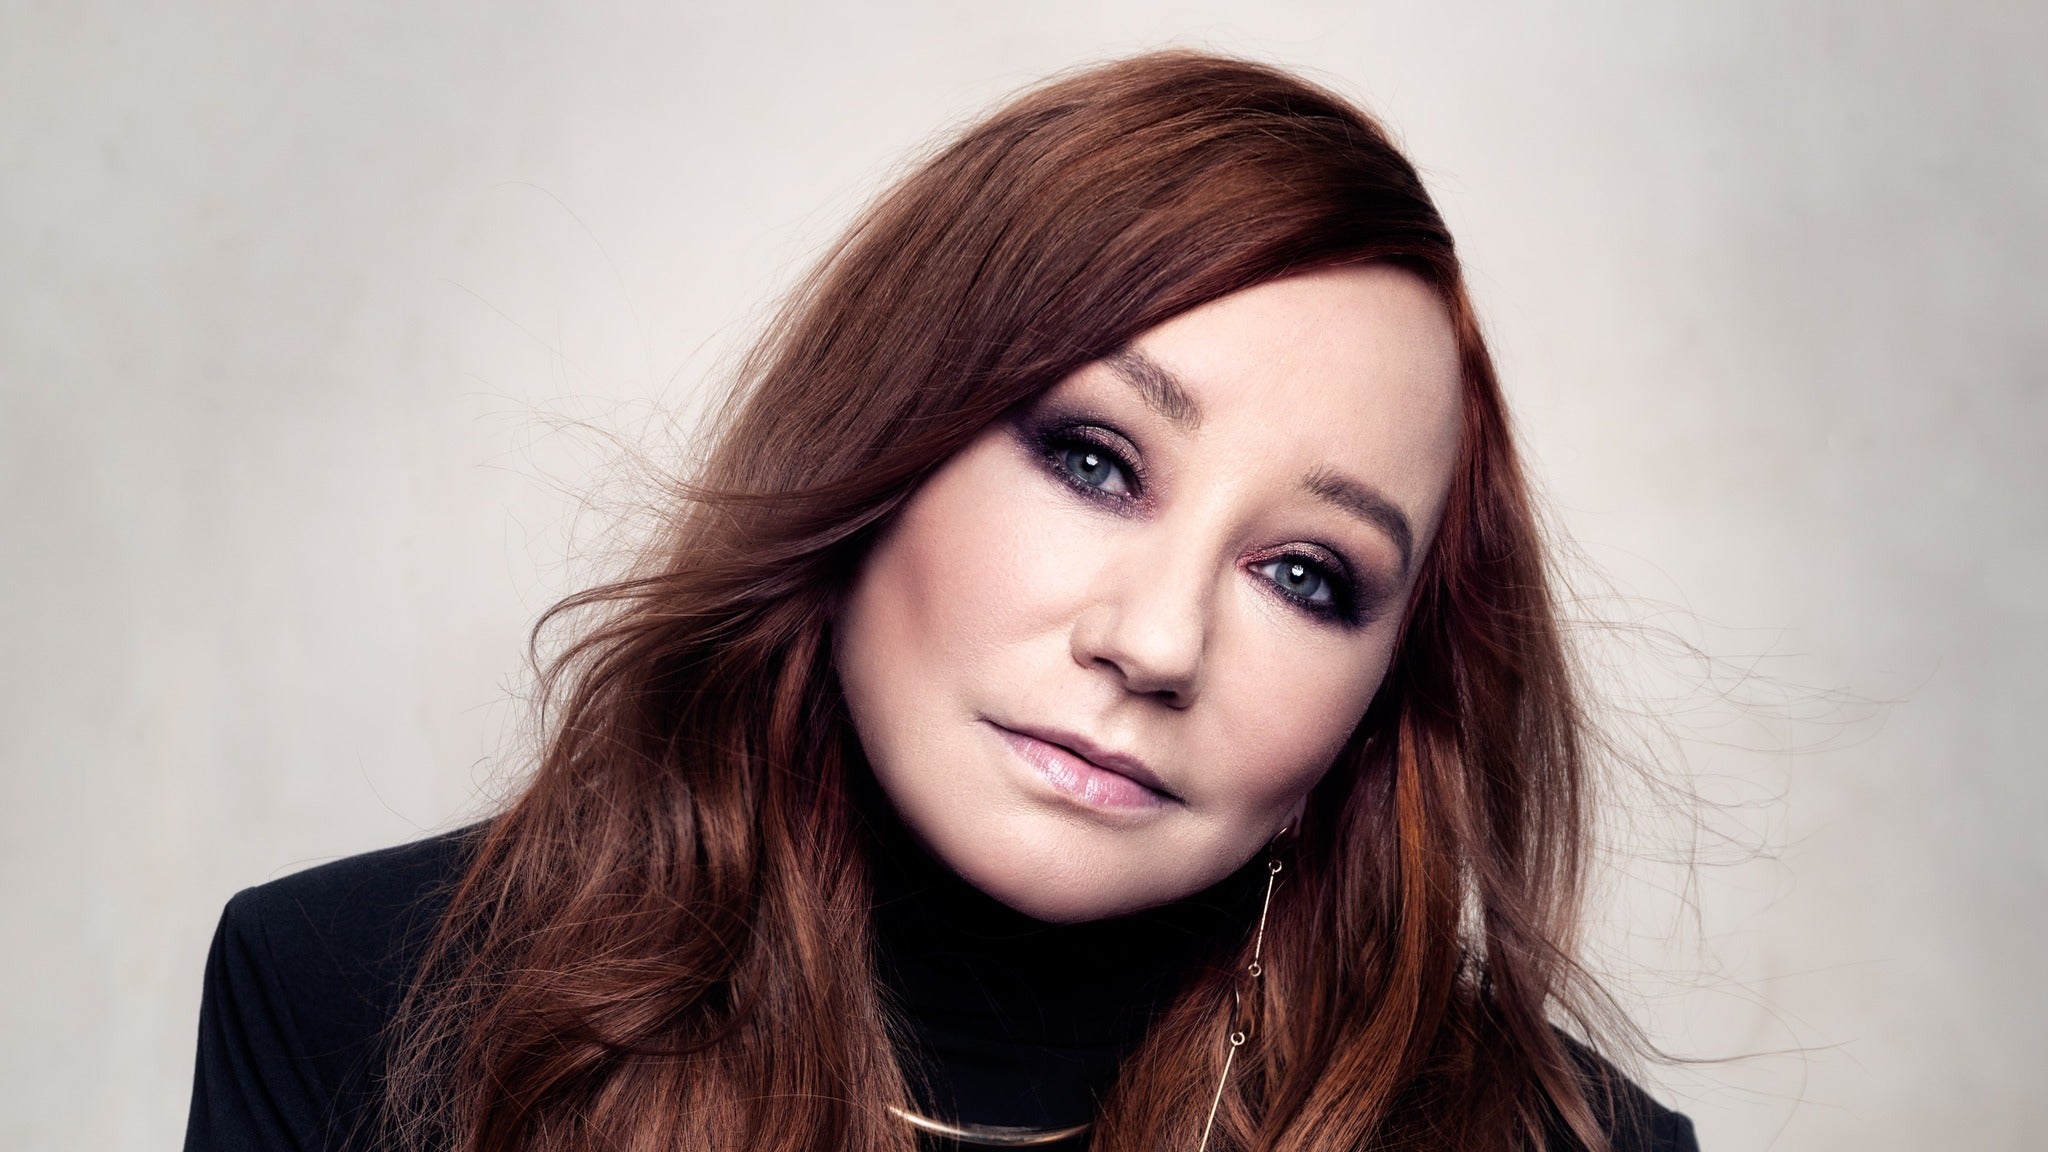 Image used with permission from Ticketmaster | Tori Amos tickets